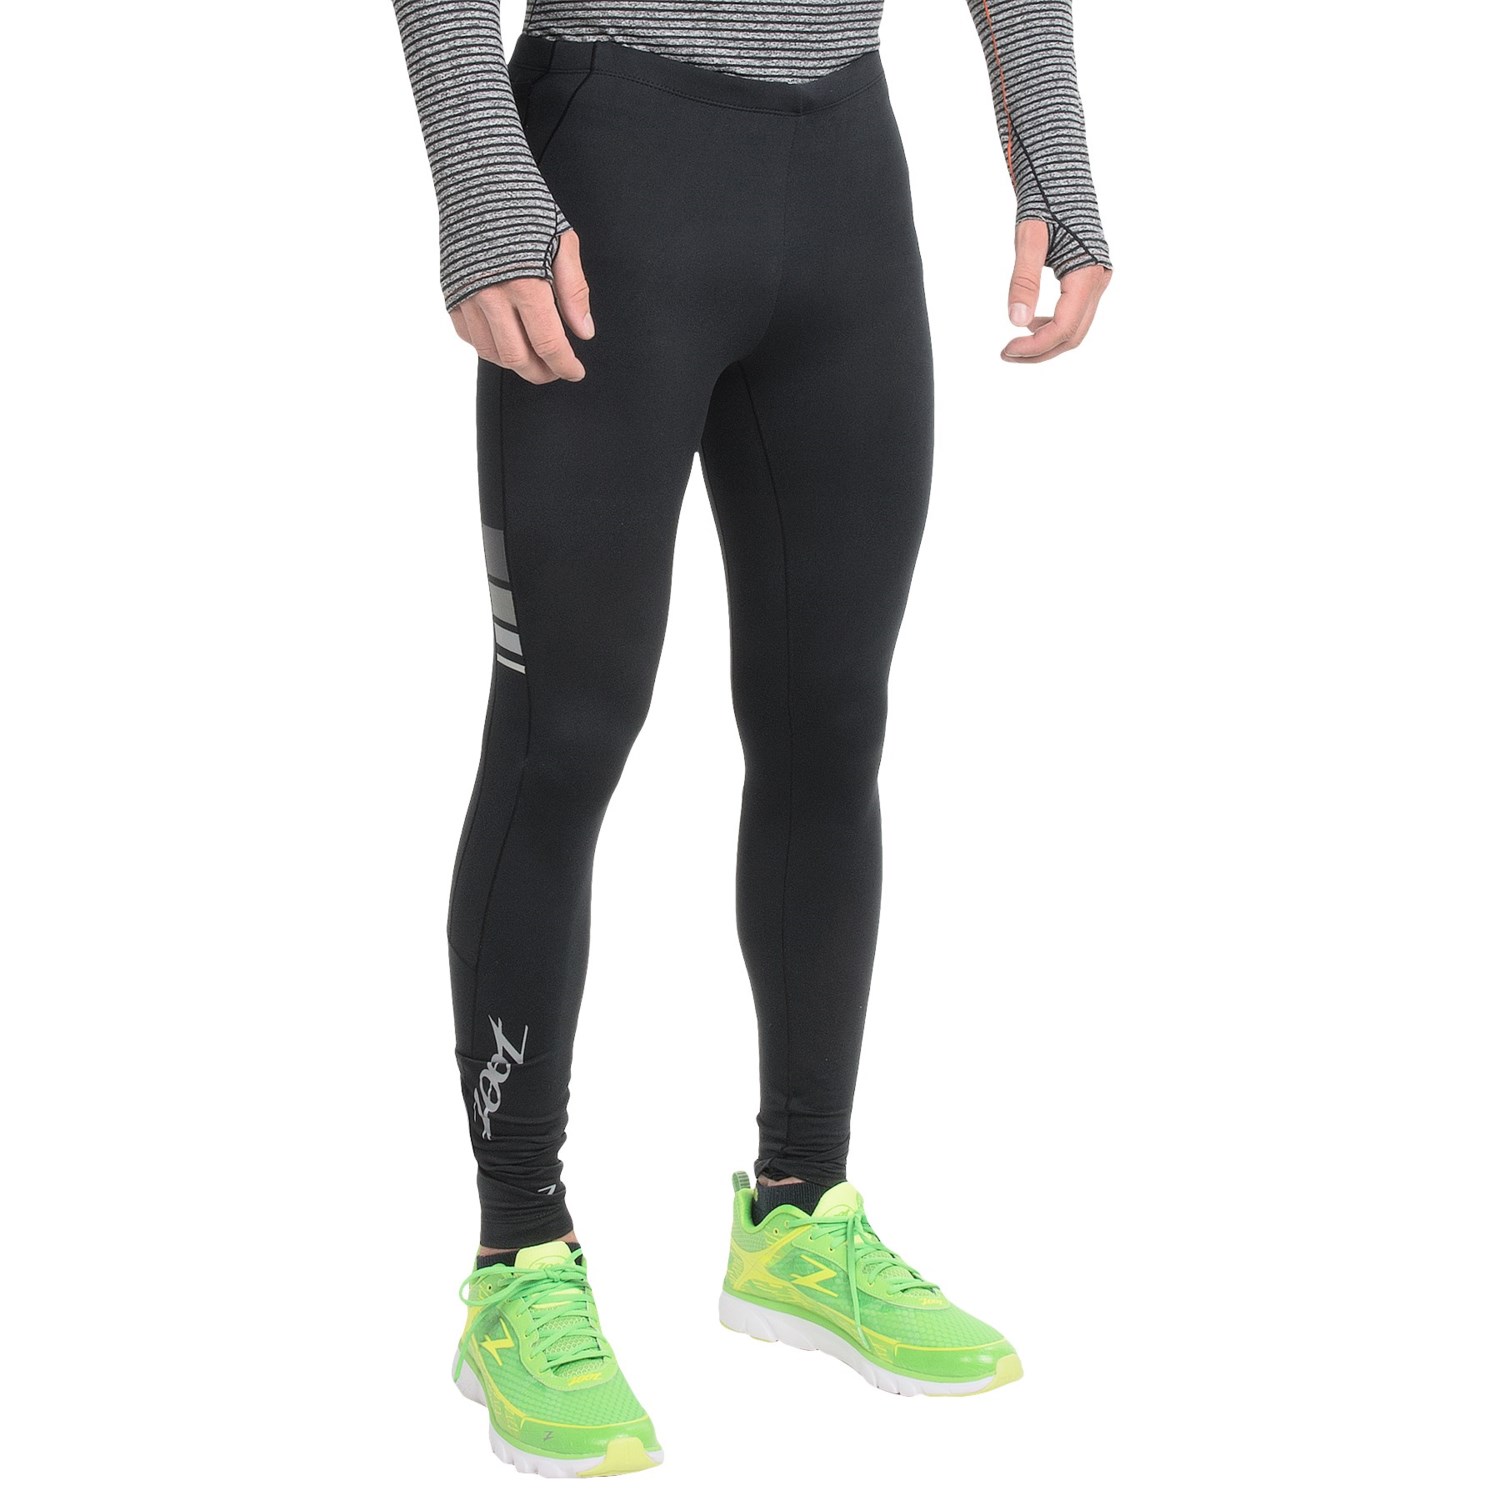 Zoot Sports Liquid Core+ Running Tights (For Men) 112WF - Save 67%